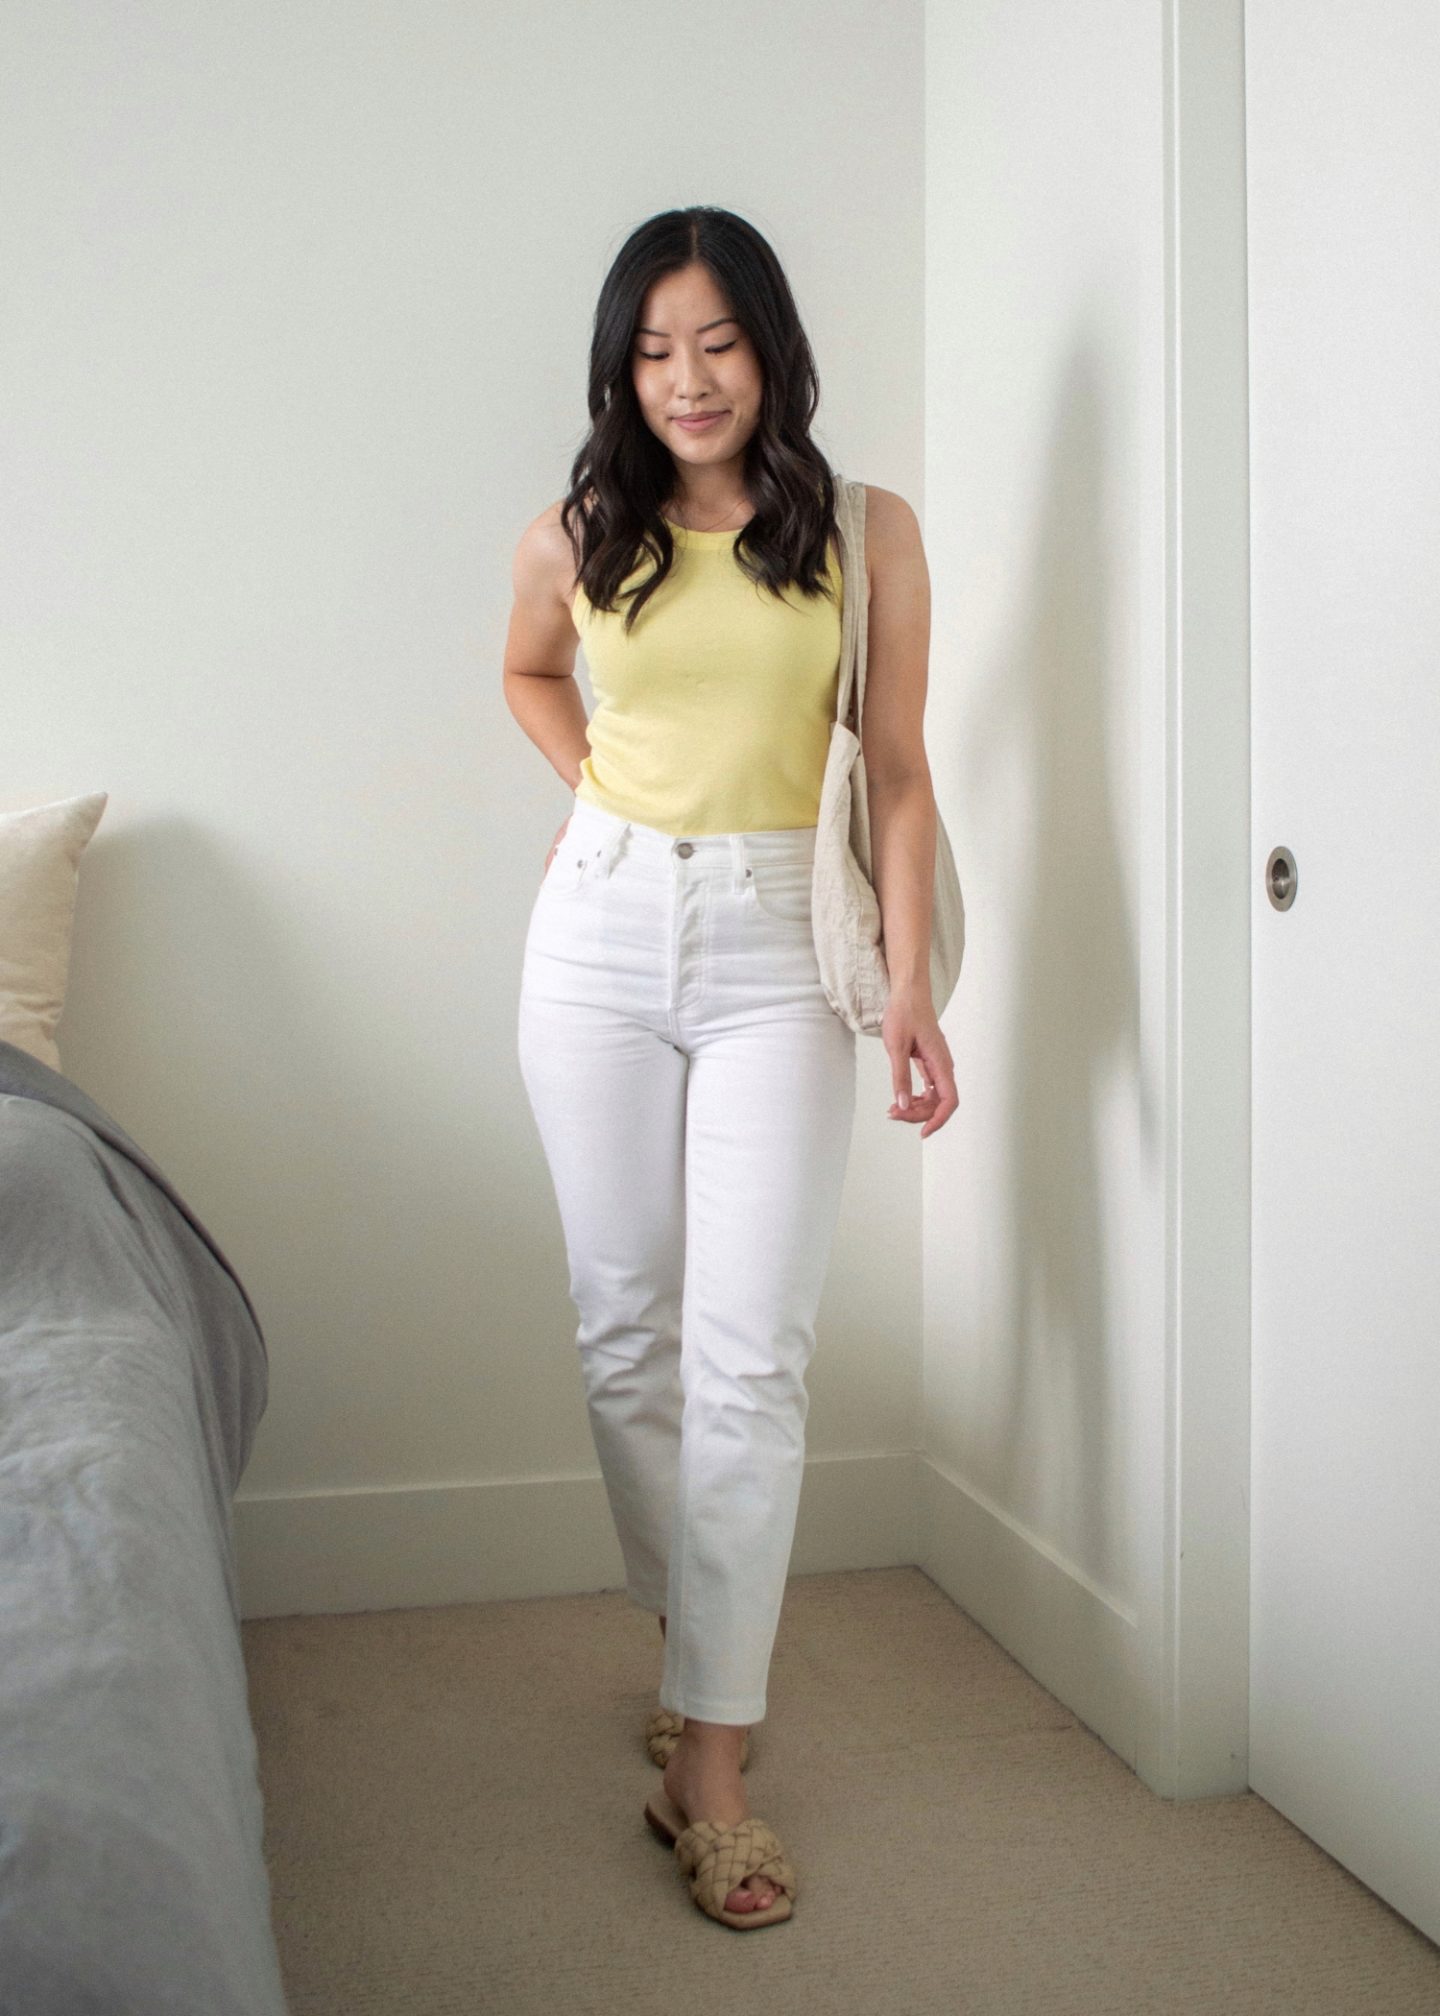 Her Simple Sole - Outfit details - Frank and Oak Good Cotton Tee in Yellow, Denim Forum Arlo Jeans in White, L'intervalle Miriel Beige Leather sandals, Harly Jae Zero Waste Tote